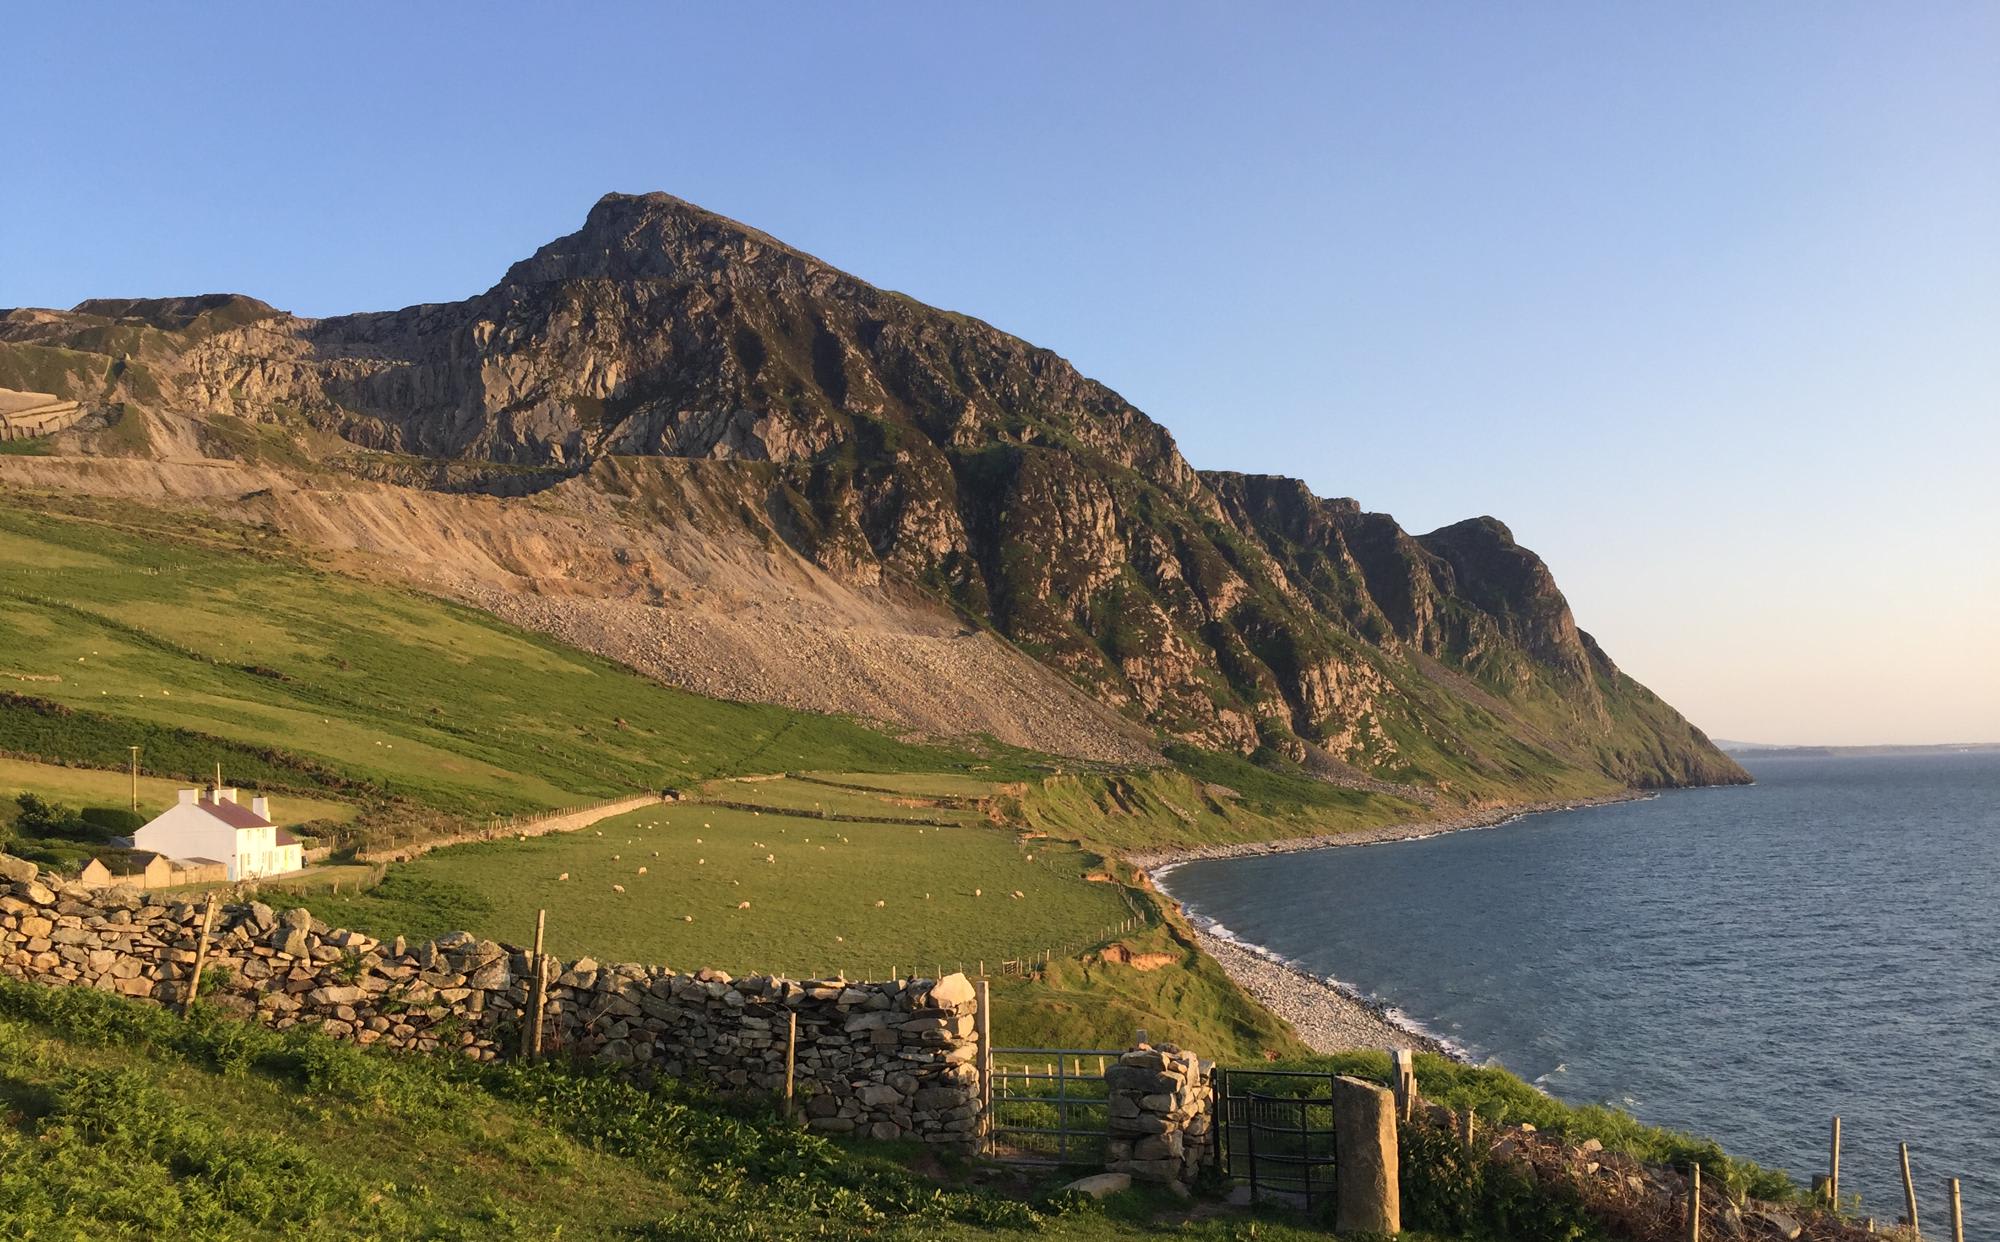 It's not just nearby Snowdonia that boasts impressive landscapes, the rugged Llyn Peninsula is an attraction of its own.